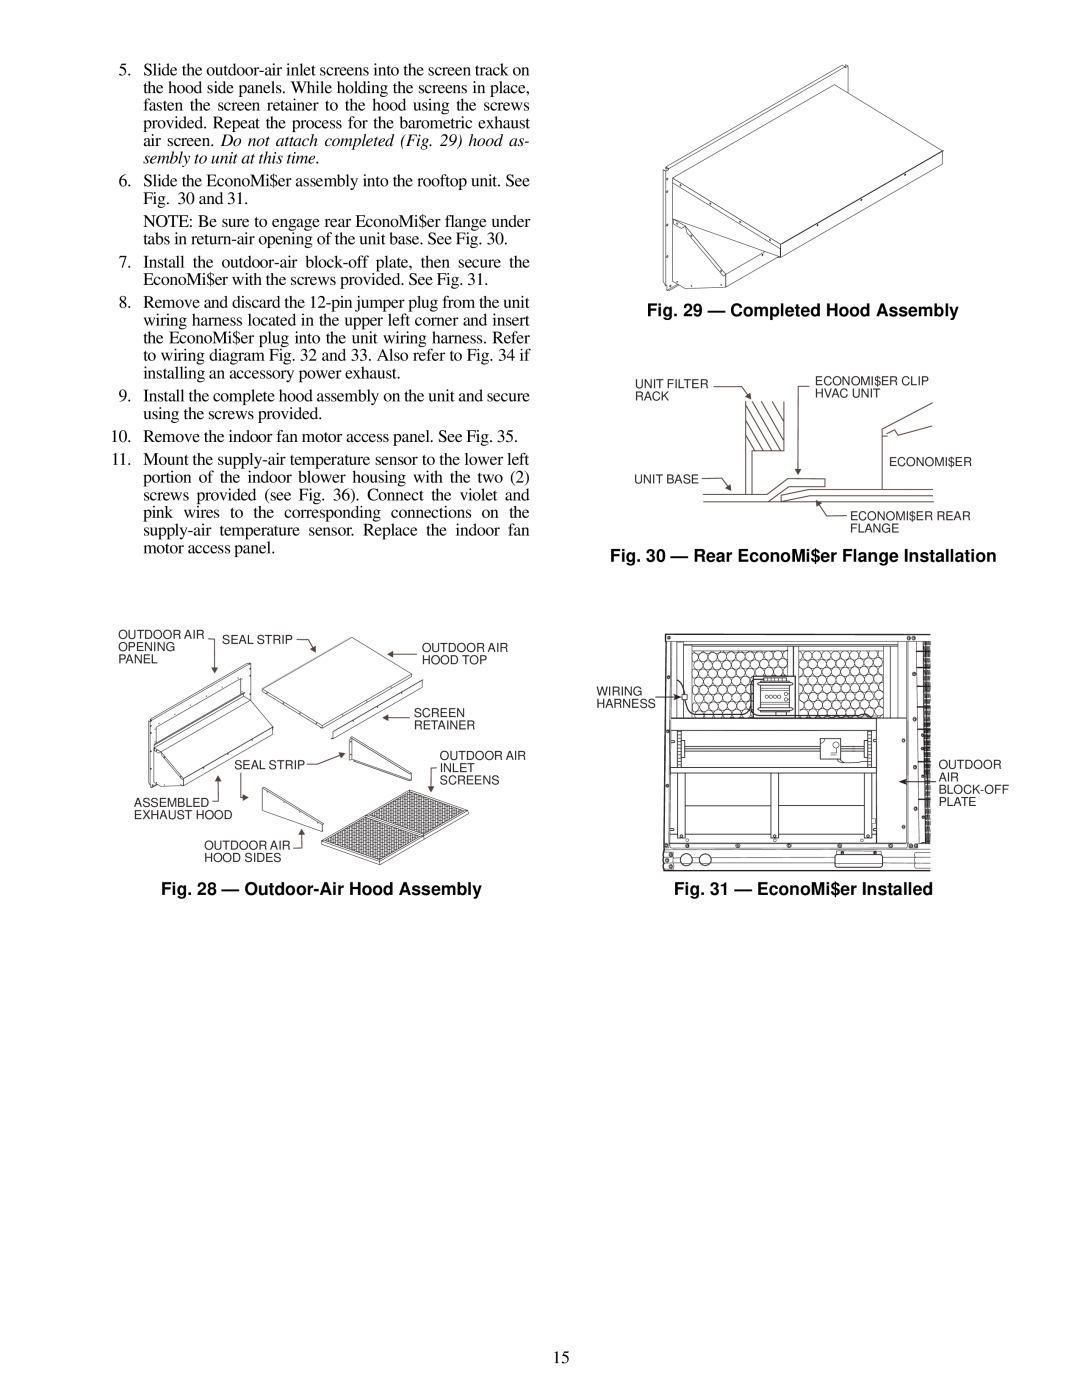 Carrier 48TF004-007 specifications Completed Hood Assembly, Rear EconoMi$er Flange Installation, Outdoor-AirHood Assembly 